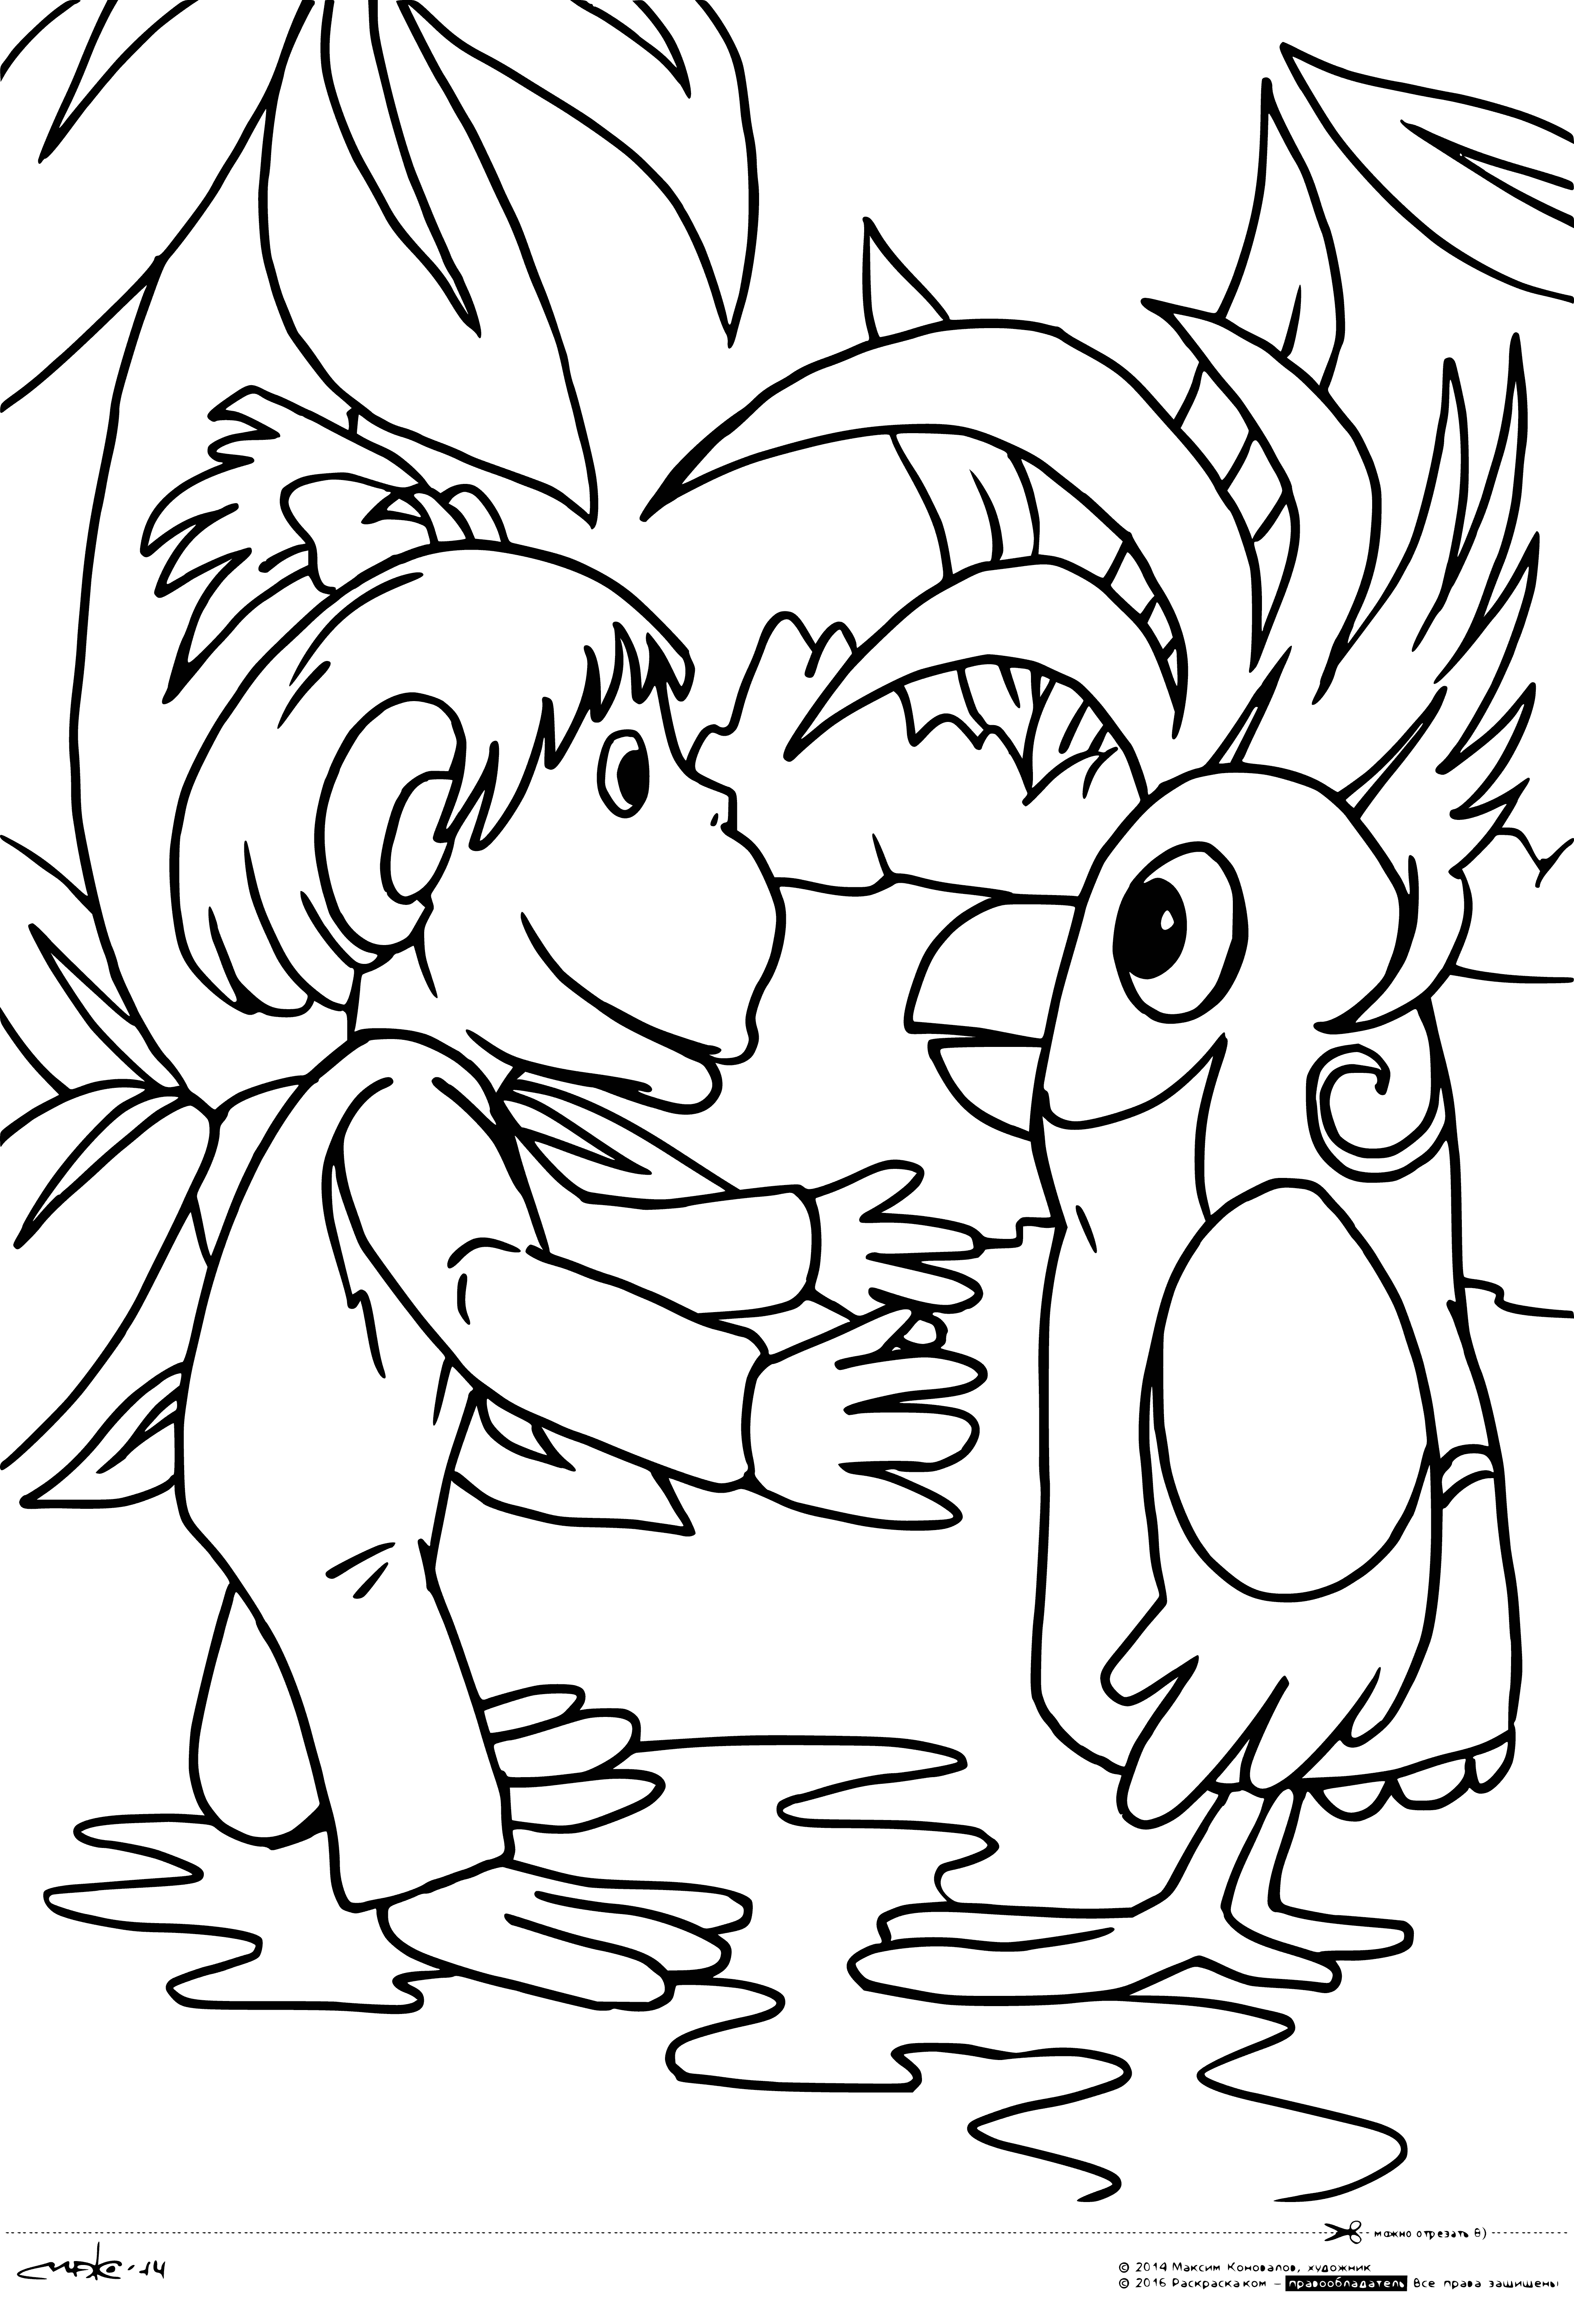 coloring page: 38 parrots of various colors sit in a tree with a monkey. All tucked in to make a coloring page perfect scene! #coloringbook